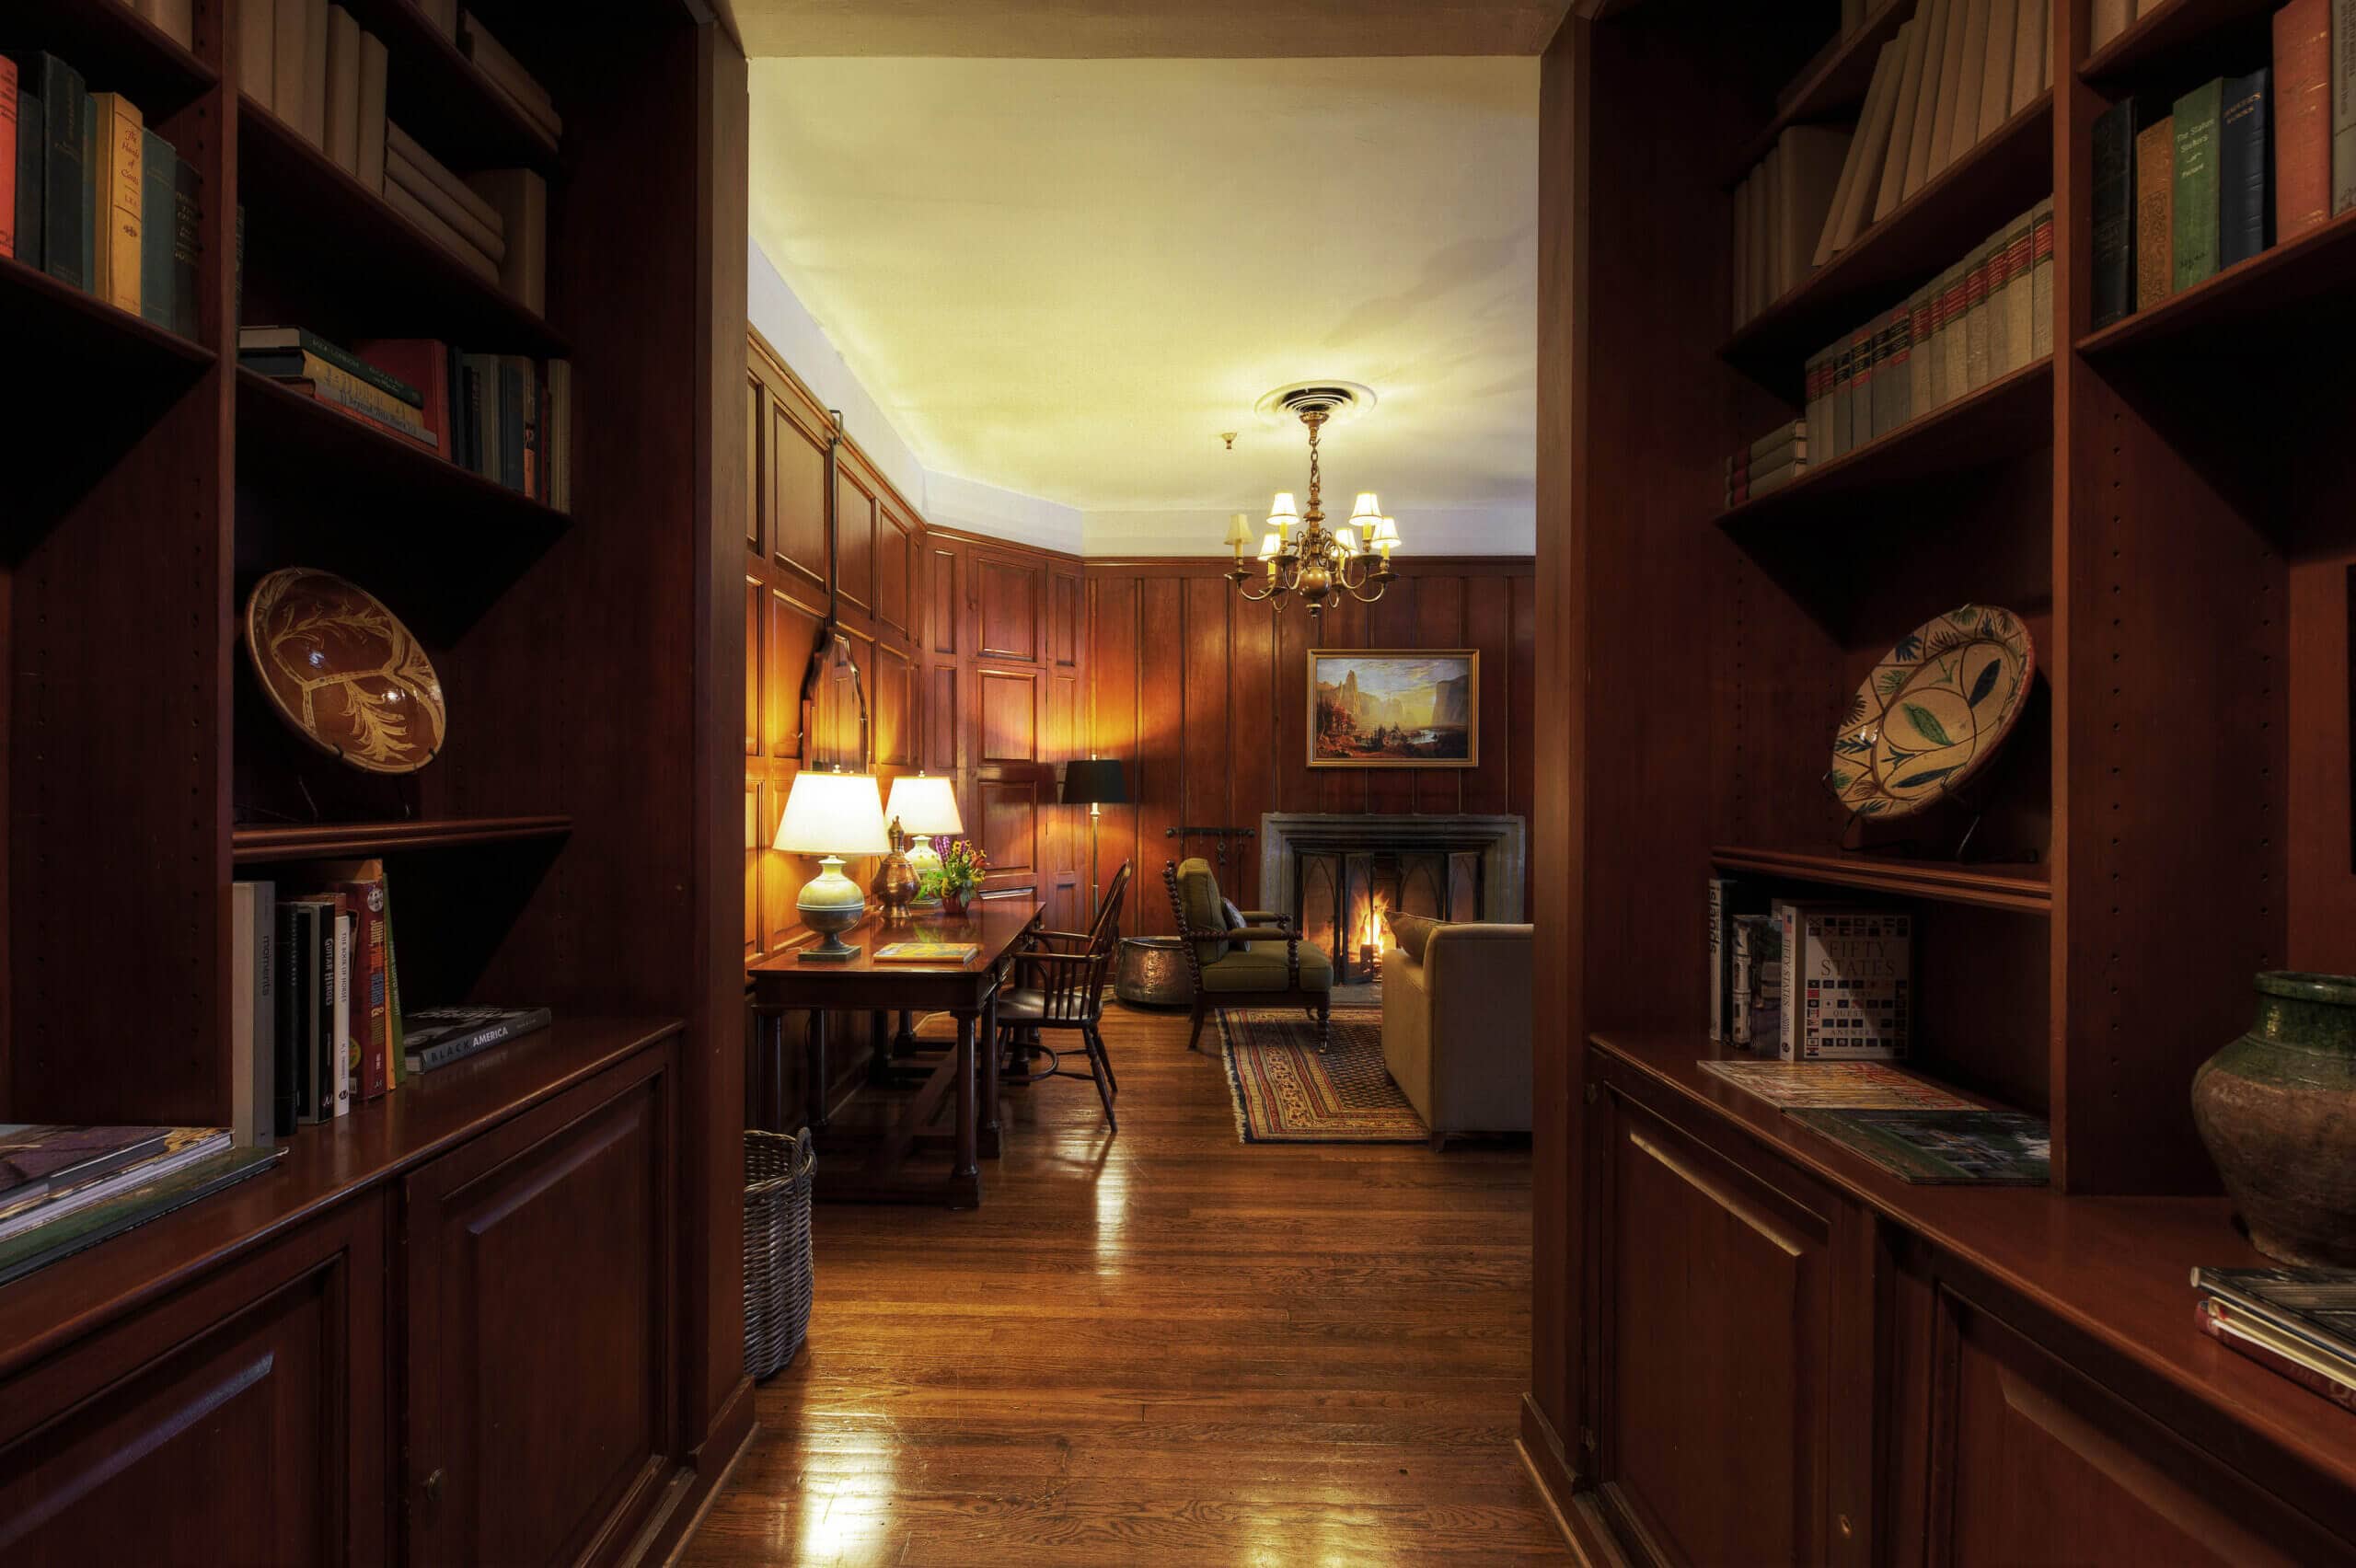 Library Suite entrance at The Ahwahnee hotel in Yosemite